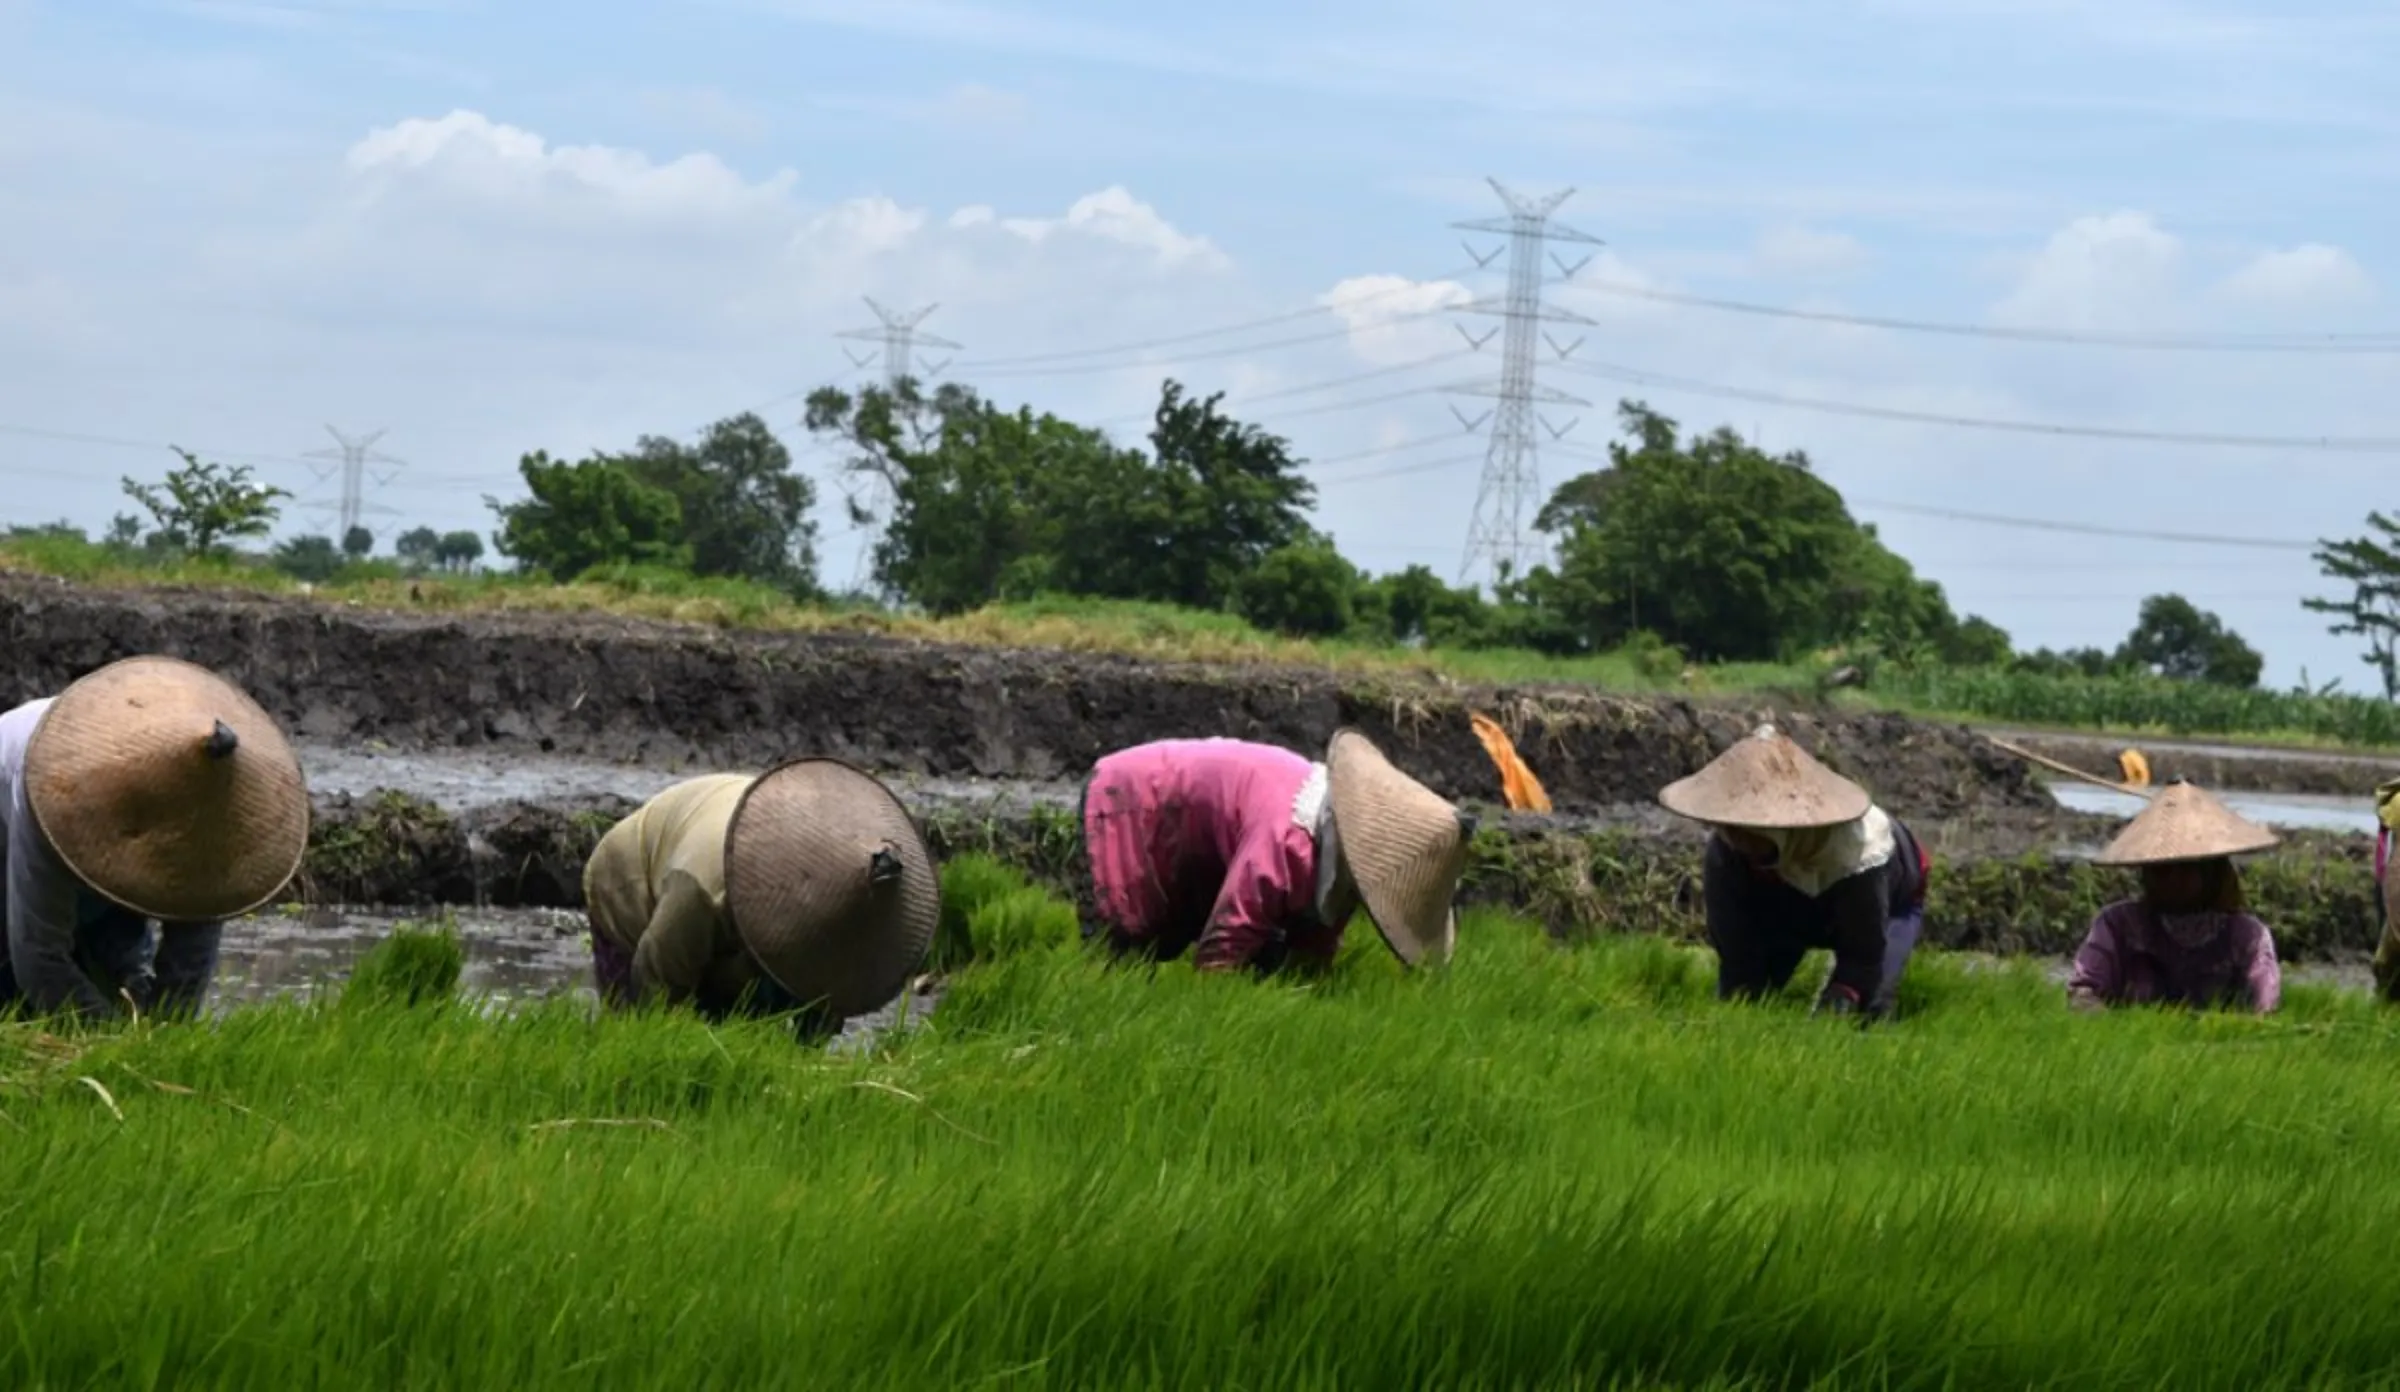 Workers in Lamongan, Indonesia. The Elnino phenomenon that took place last year has resulted in rice prices continuing to increase. Thomson Reuters Foundation/Asad Asnawi